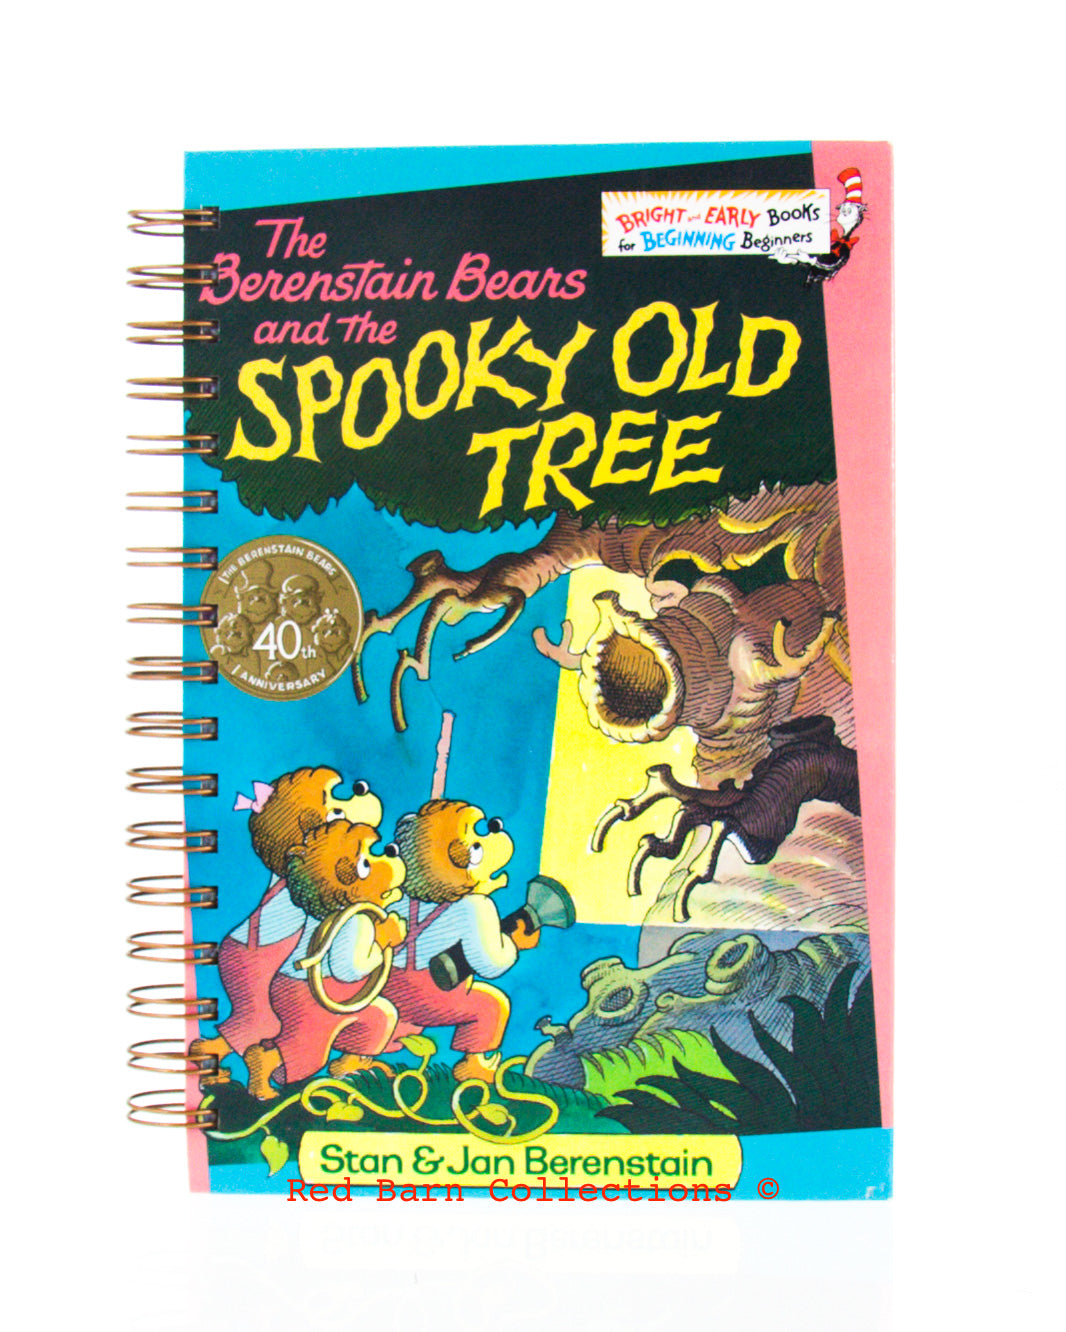 Berenstain Bears: The Spooky Old Tree-Red Barn Collections